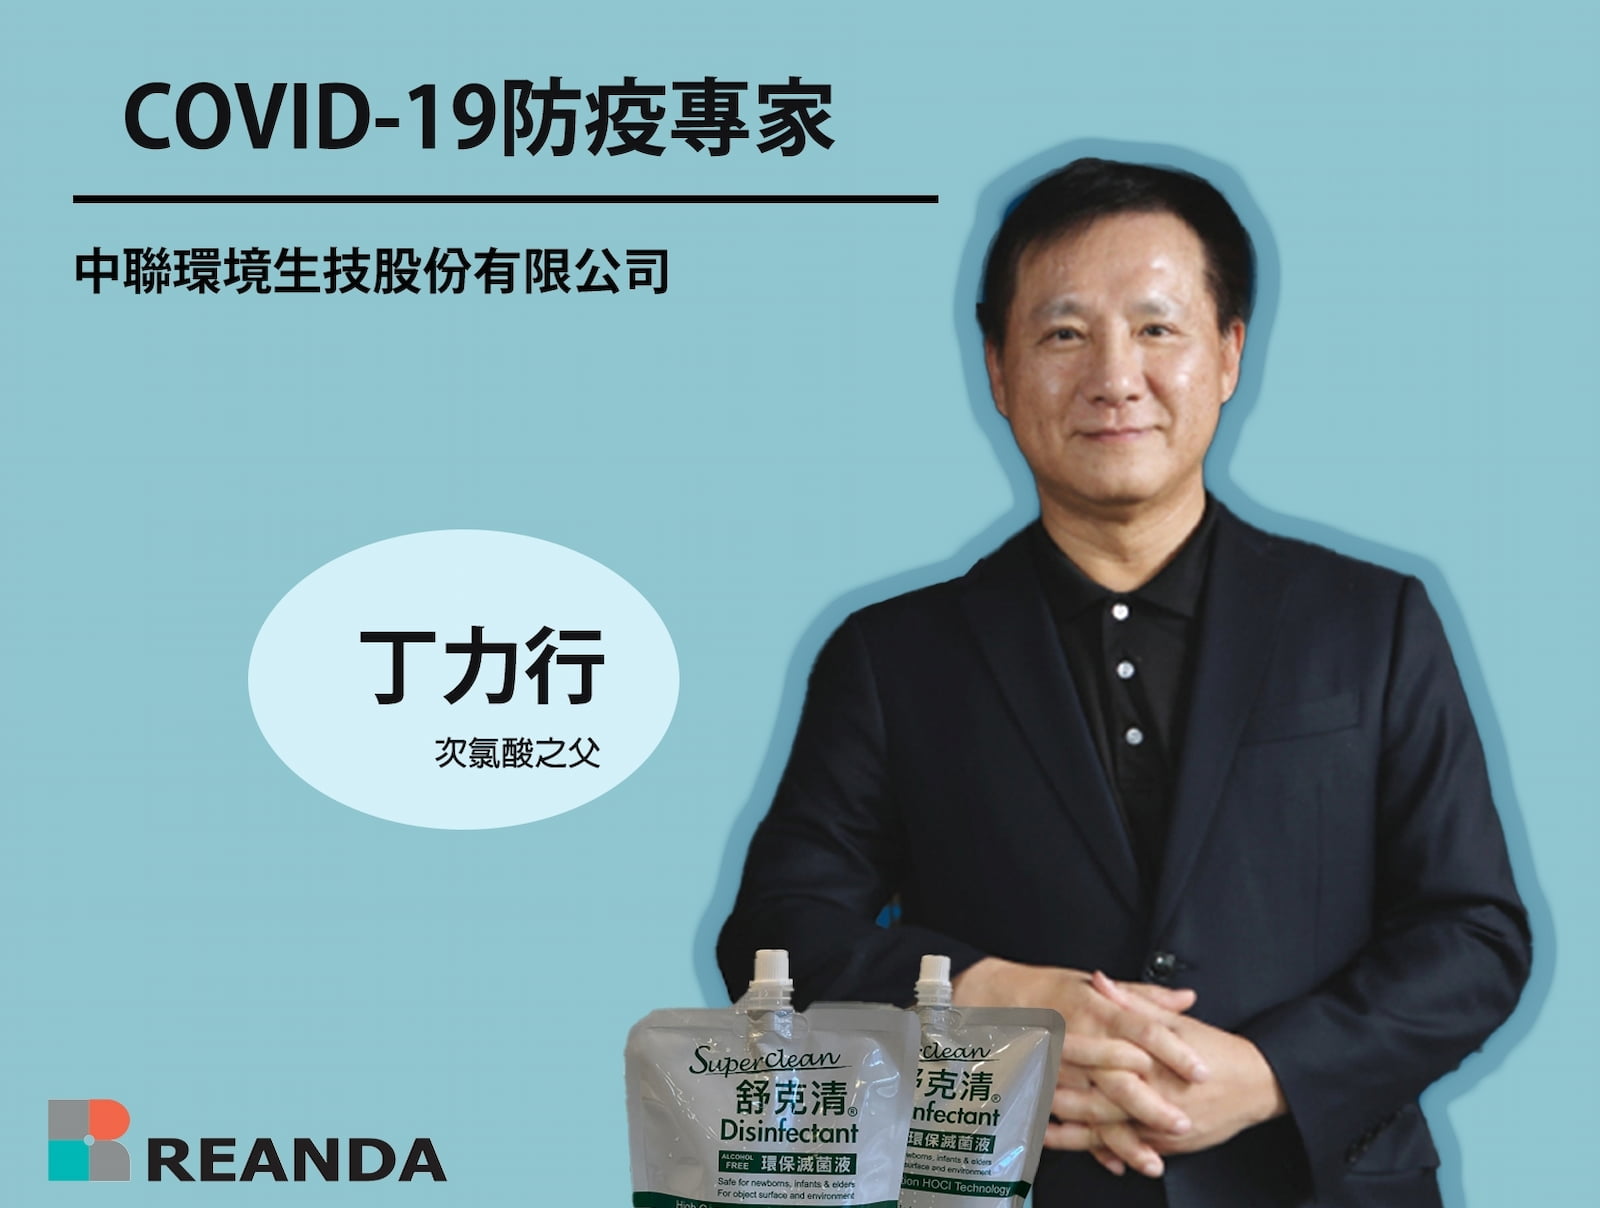 COVID-19 prevention expert – Dr. Ding Lixing